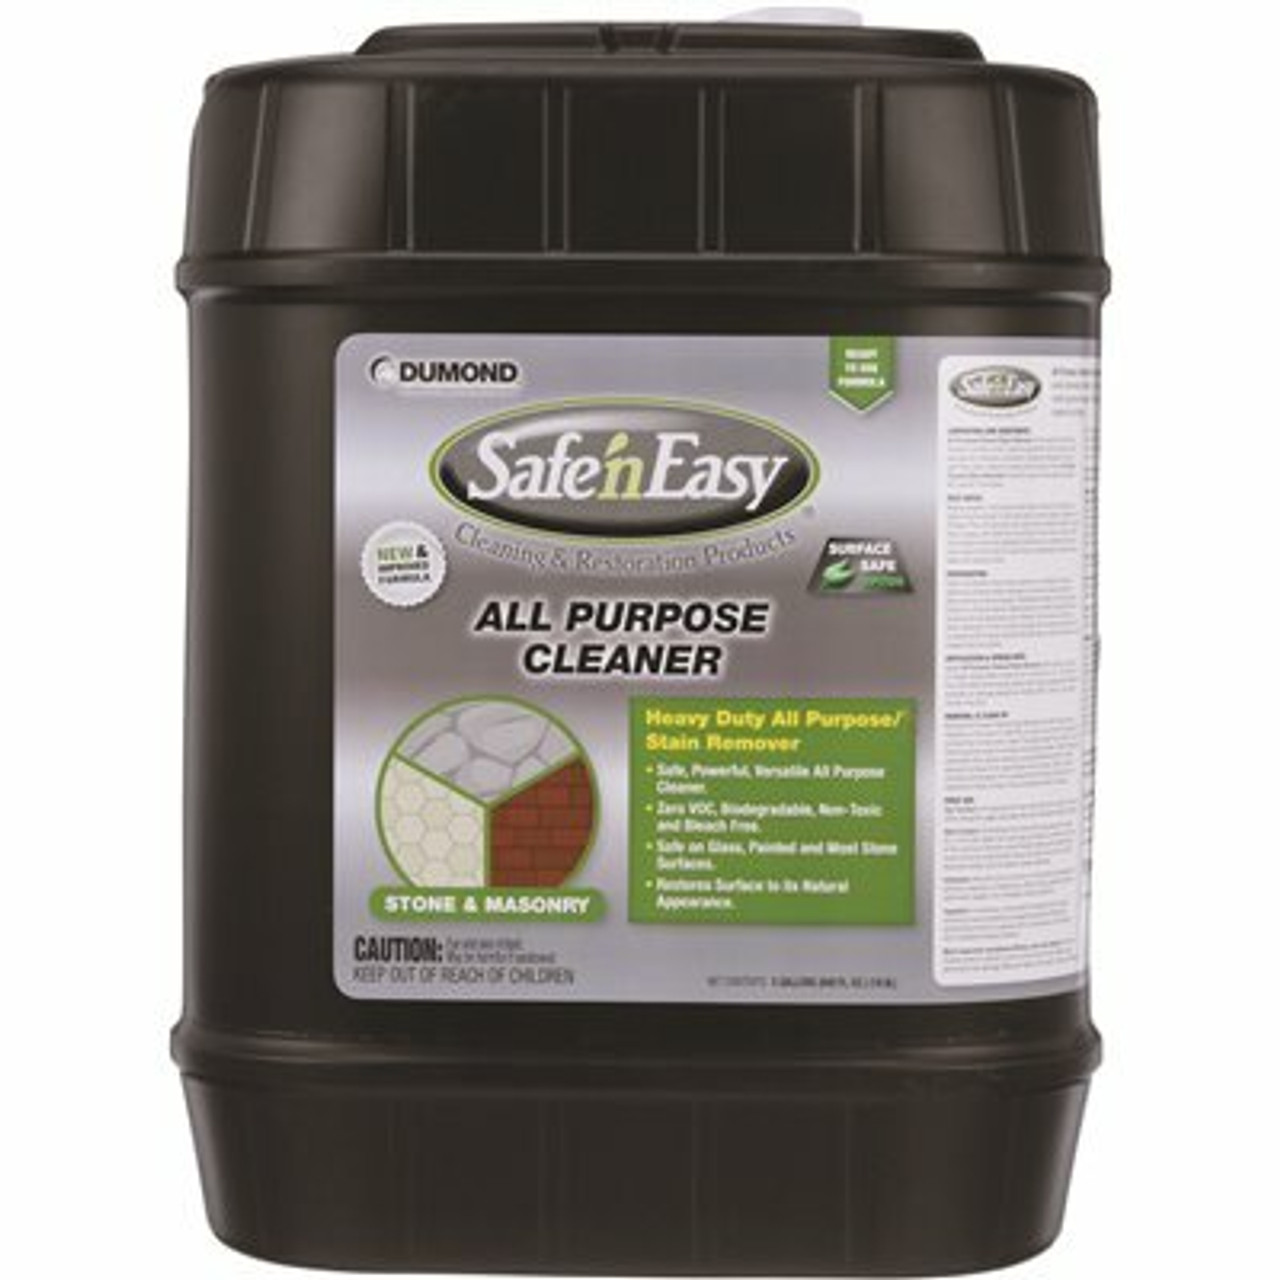 Safe 'N Easy 5 Gal. All Purpose Cleaner